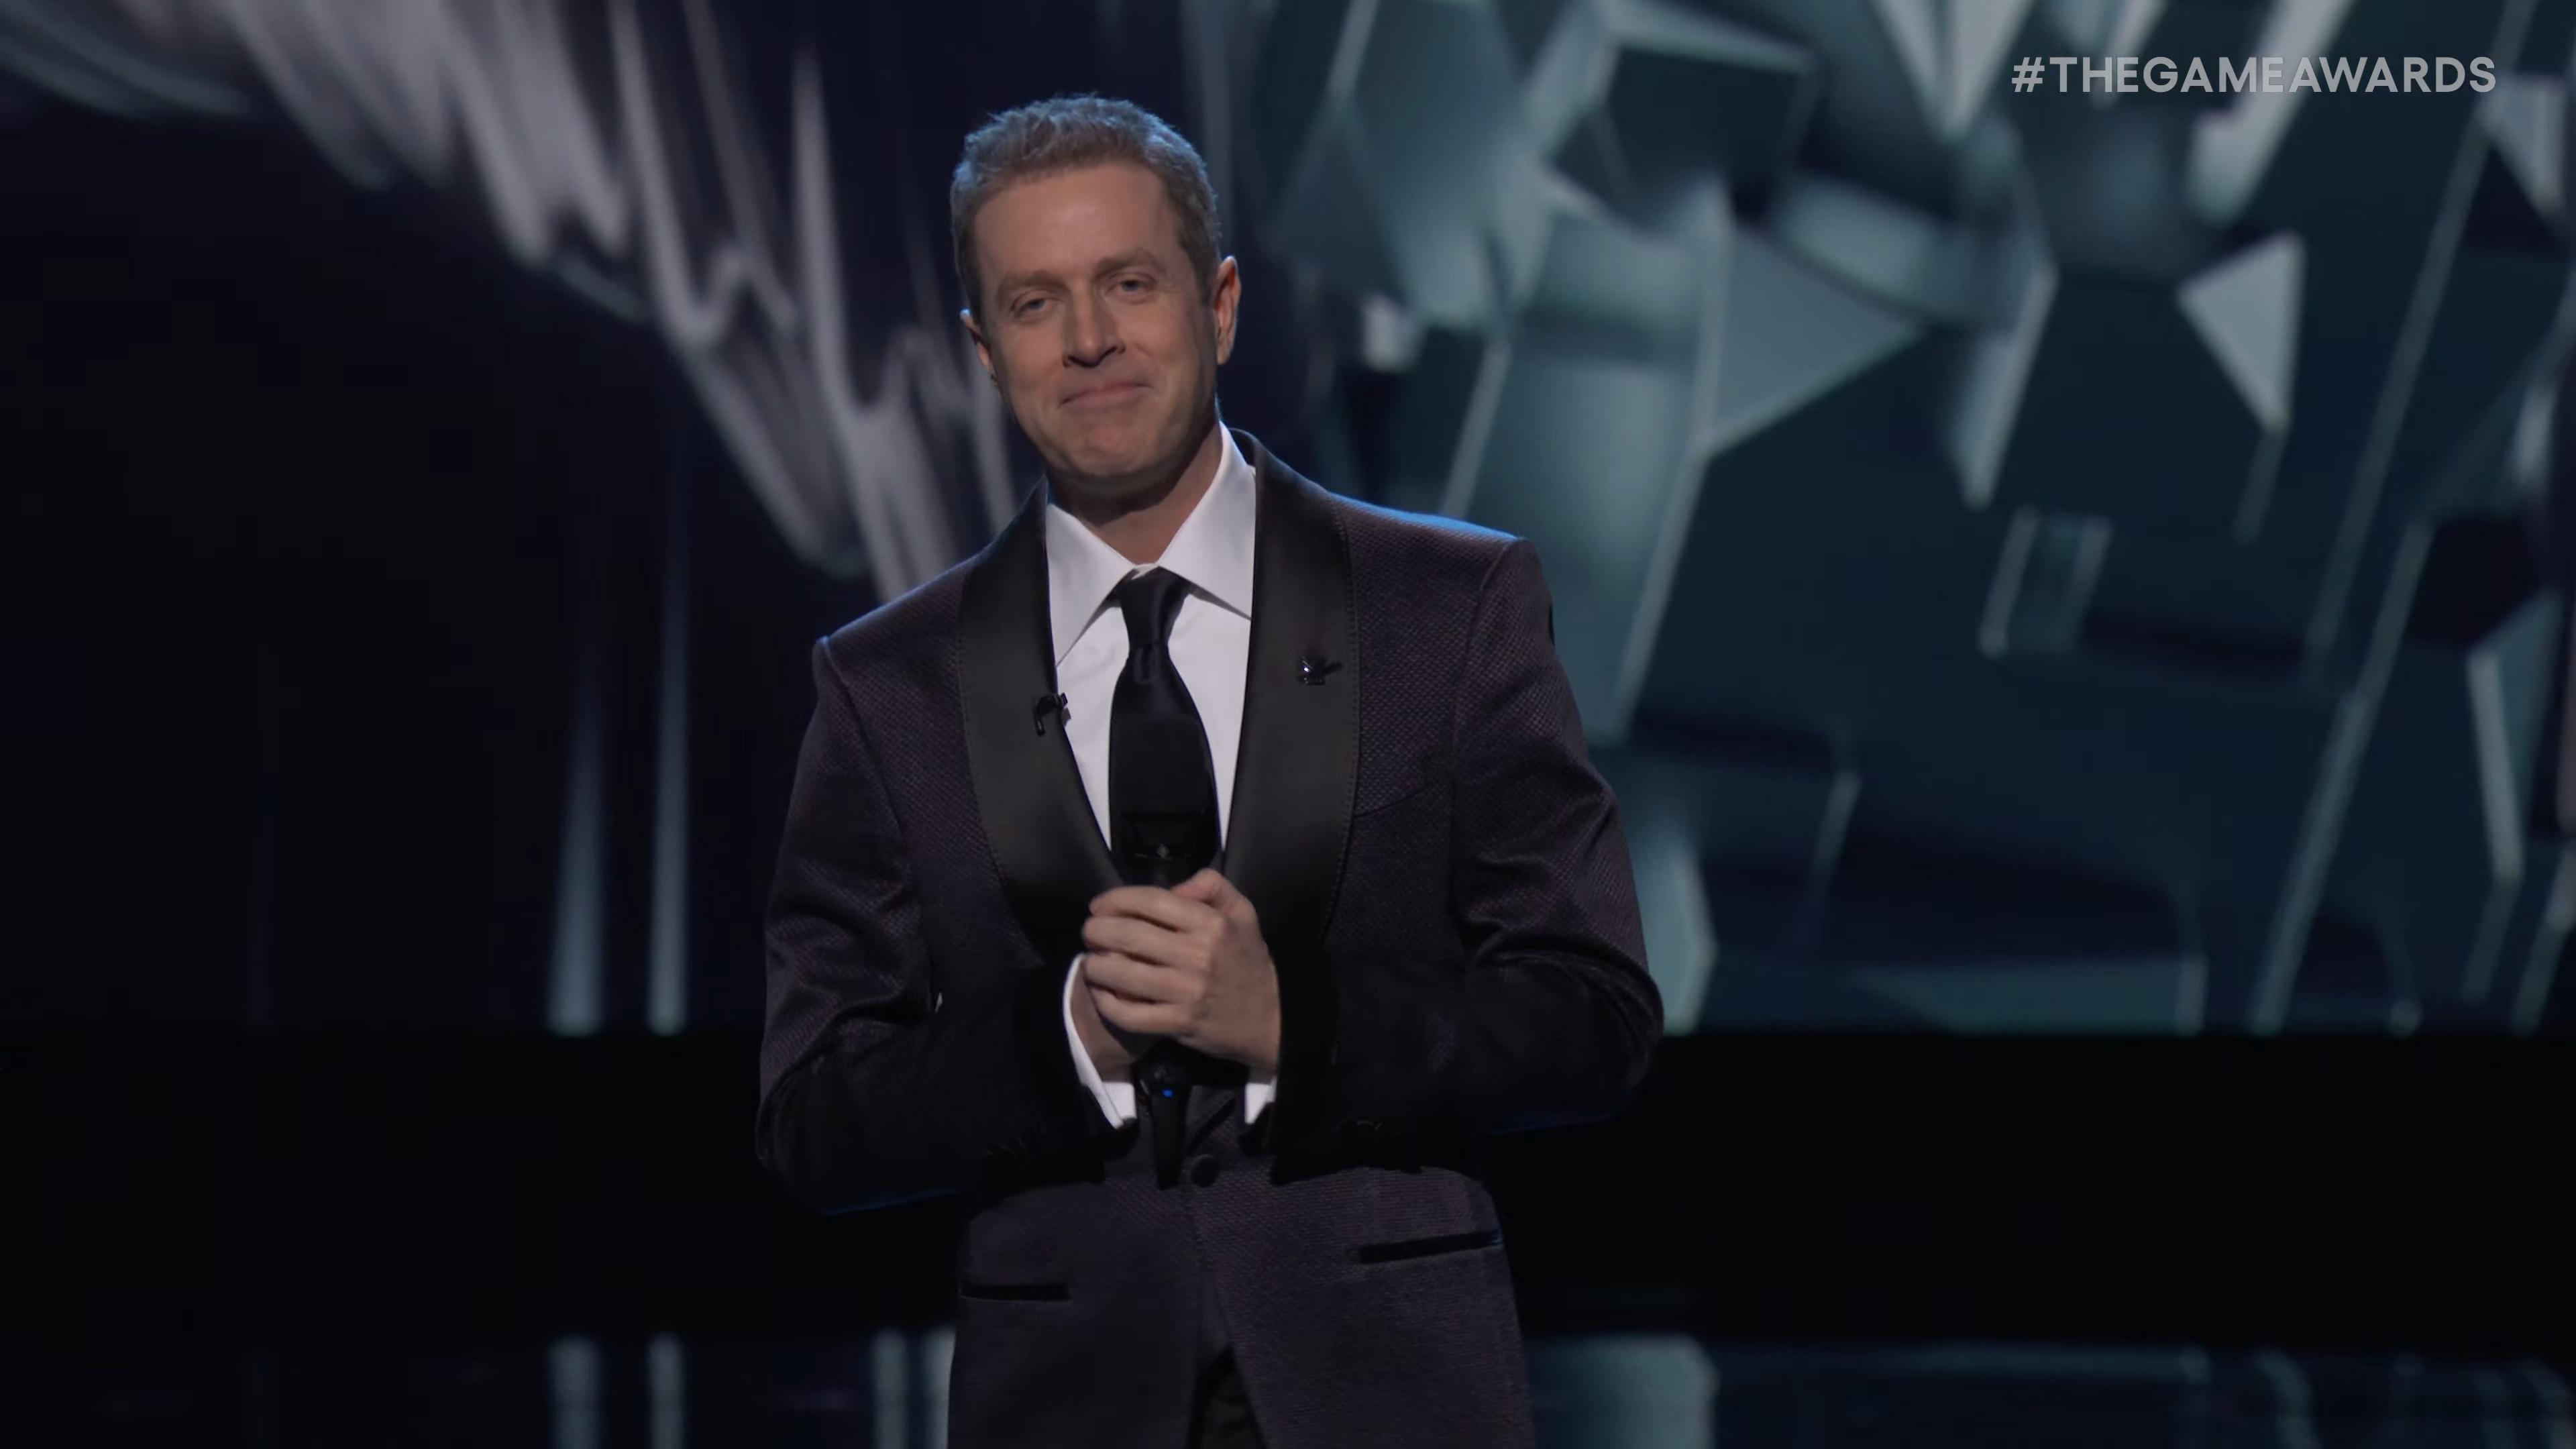 The Game Awards (@thegameawards) / X